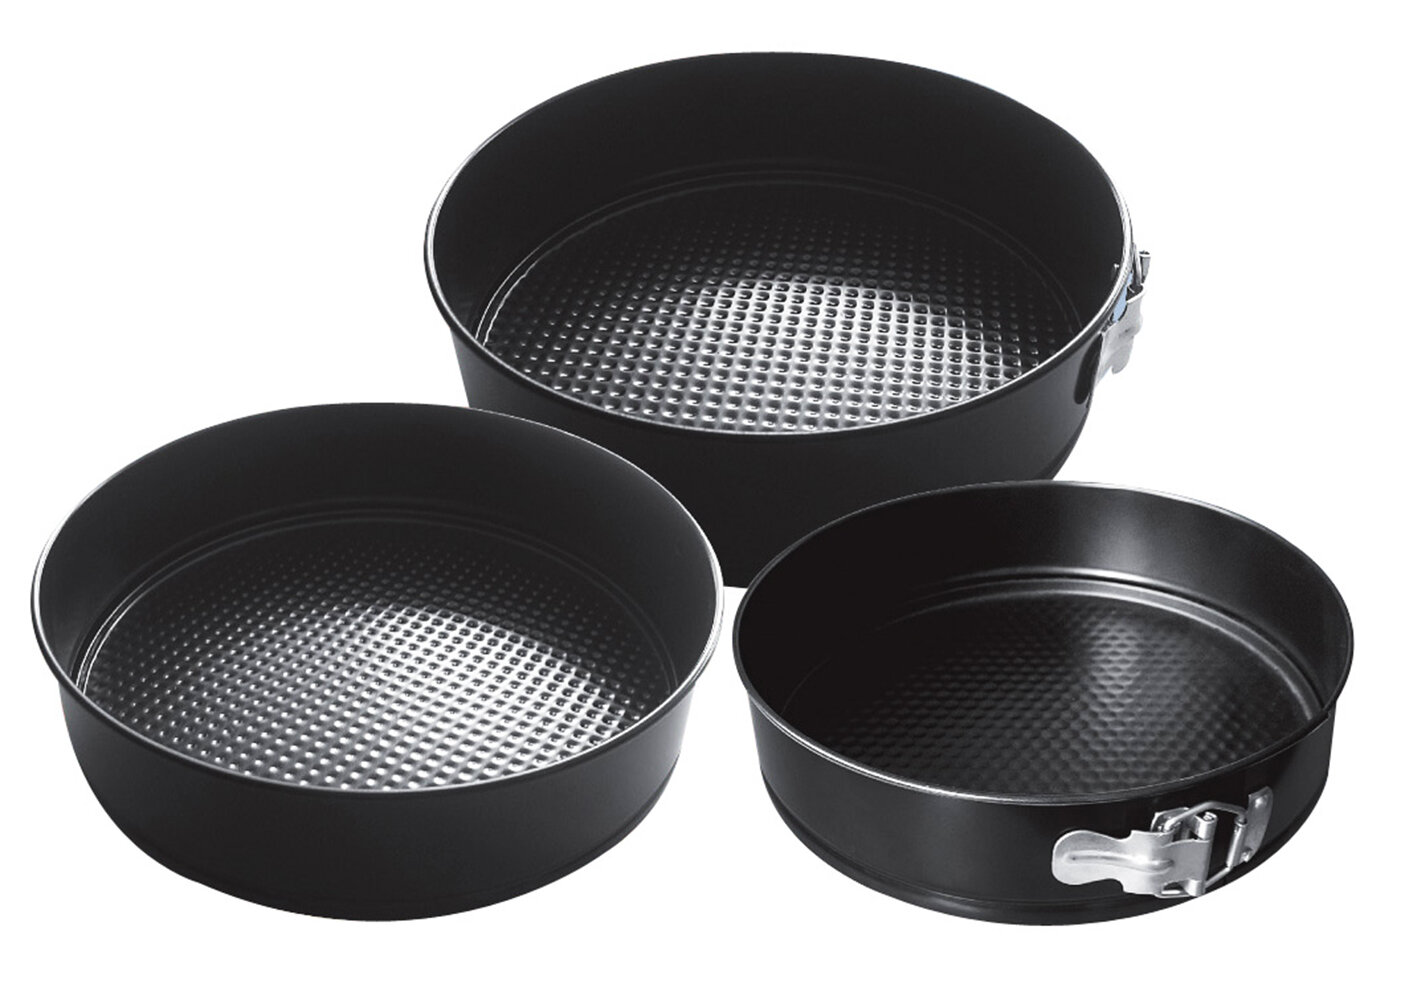 Mainstays 8 inch, 9 inch, 10 inch Round Nonstick Carbon Steel Springform Cake Pans, Gray, Set of 3, Size: 6, 8, and 10 inch